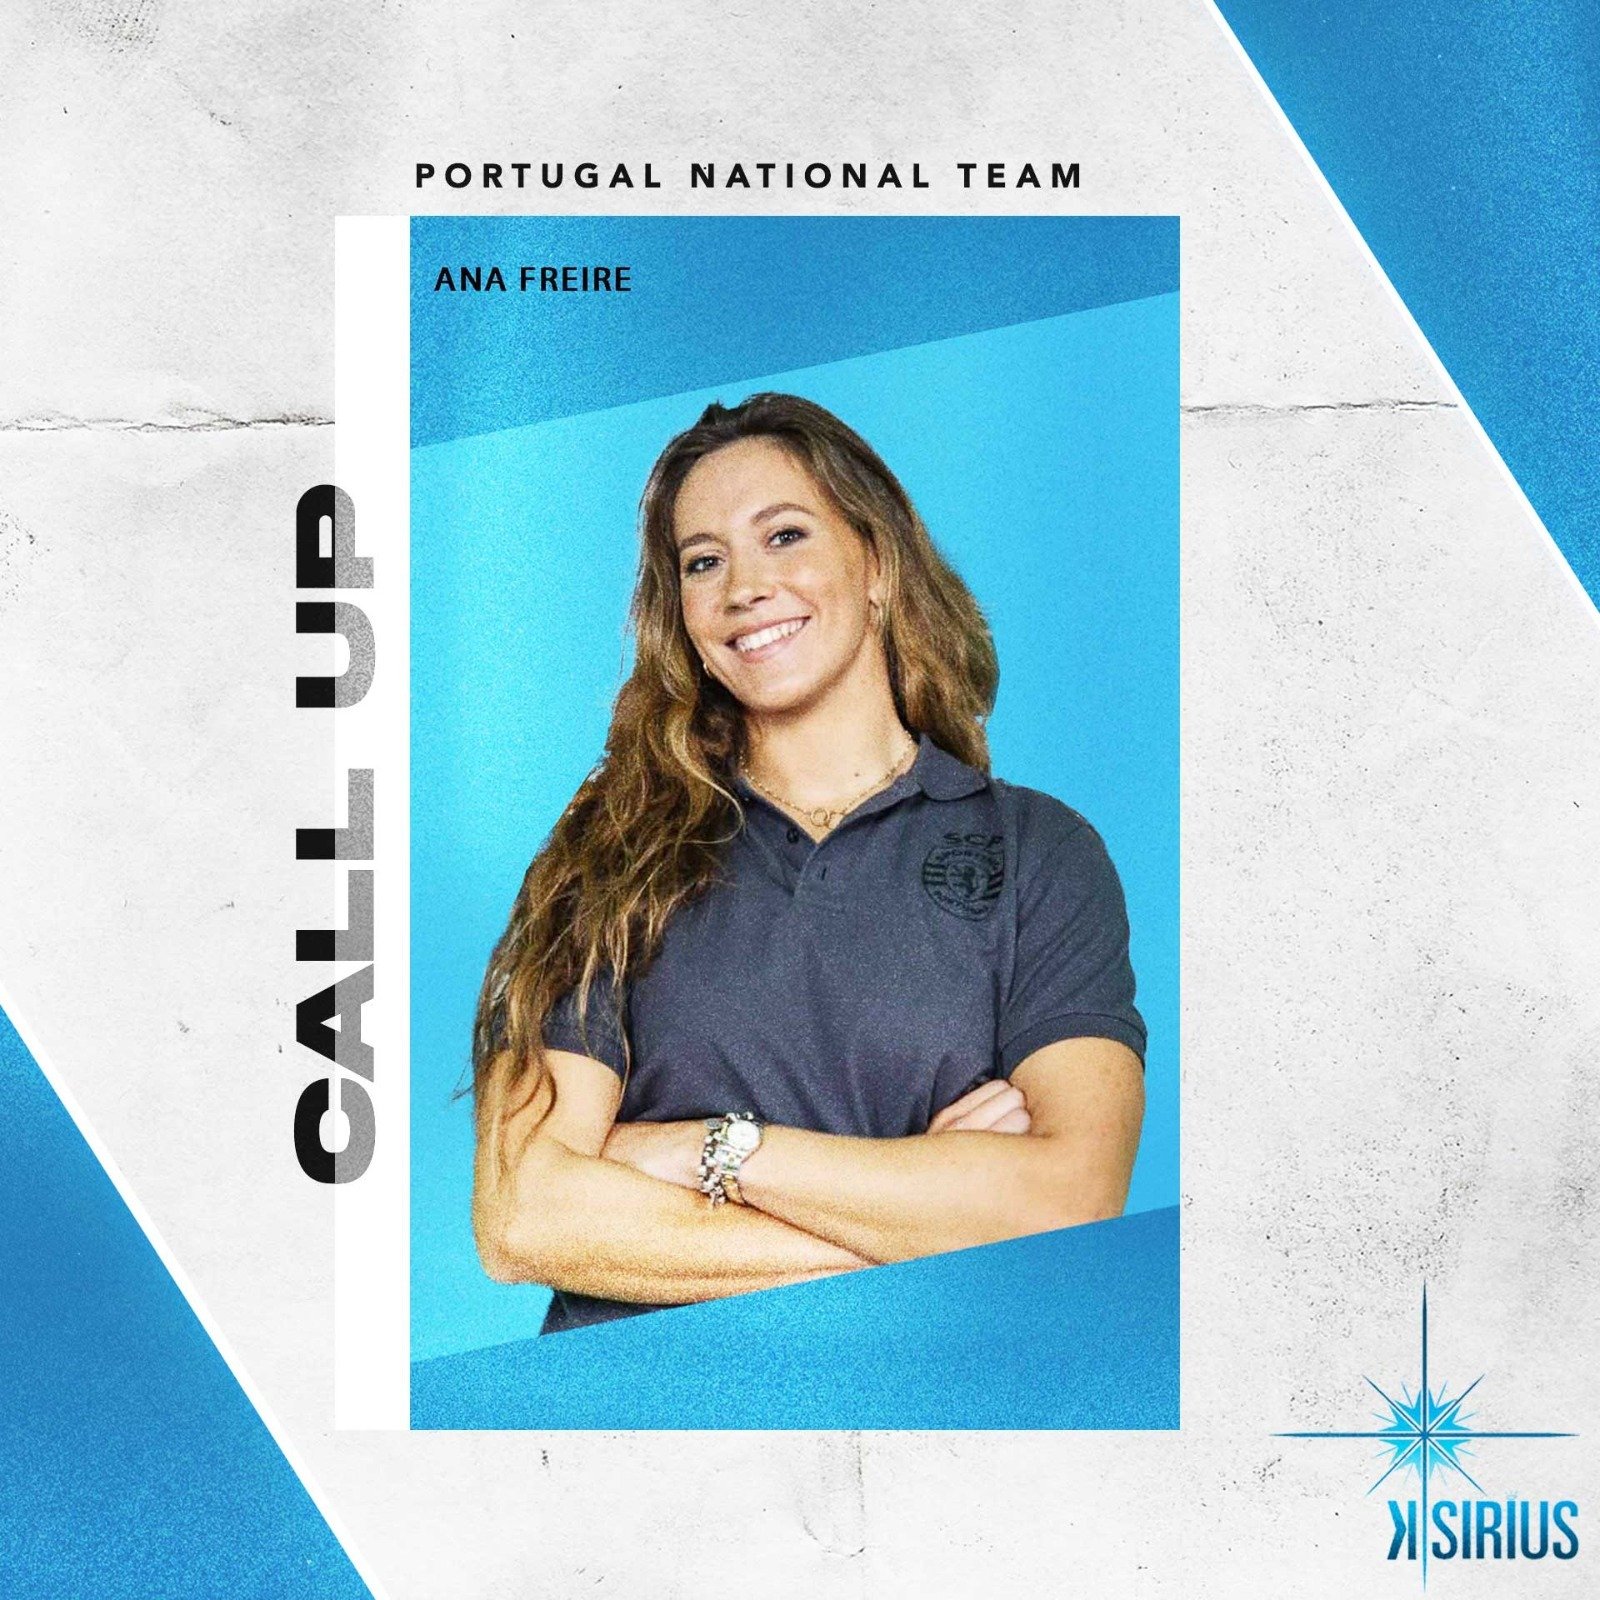 Call Up: Ana Freire (Sporting CP)